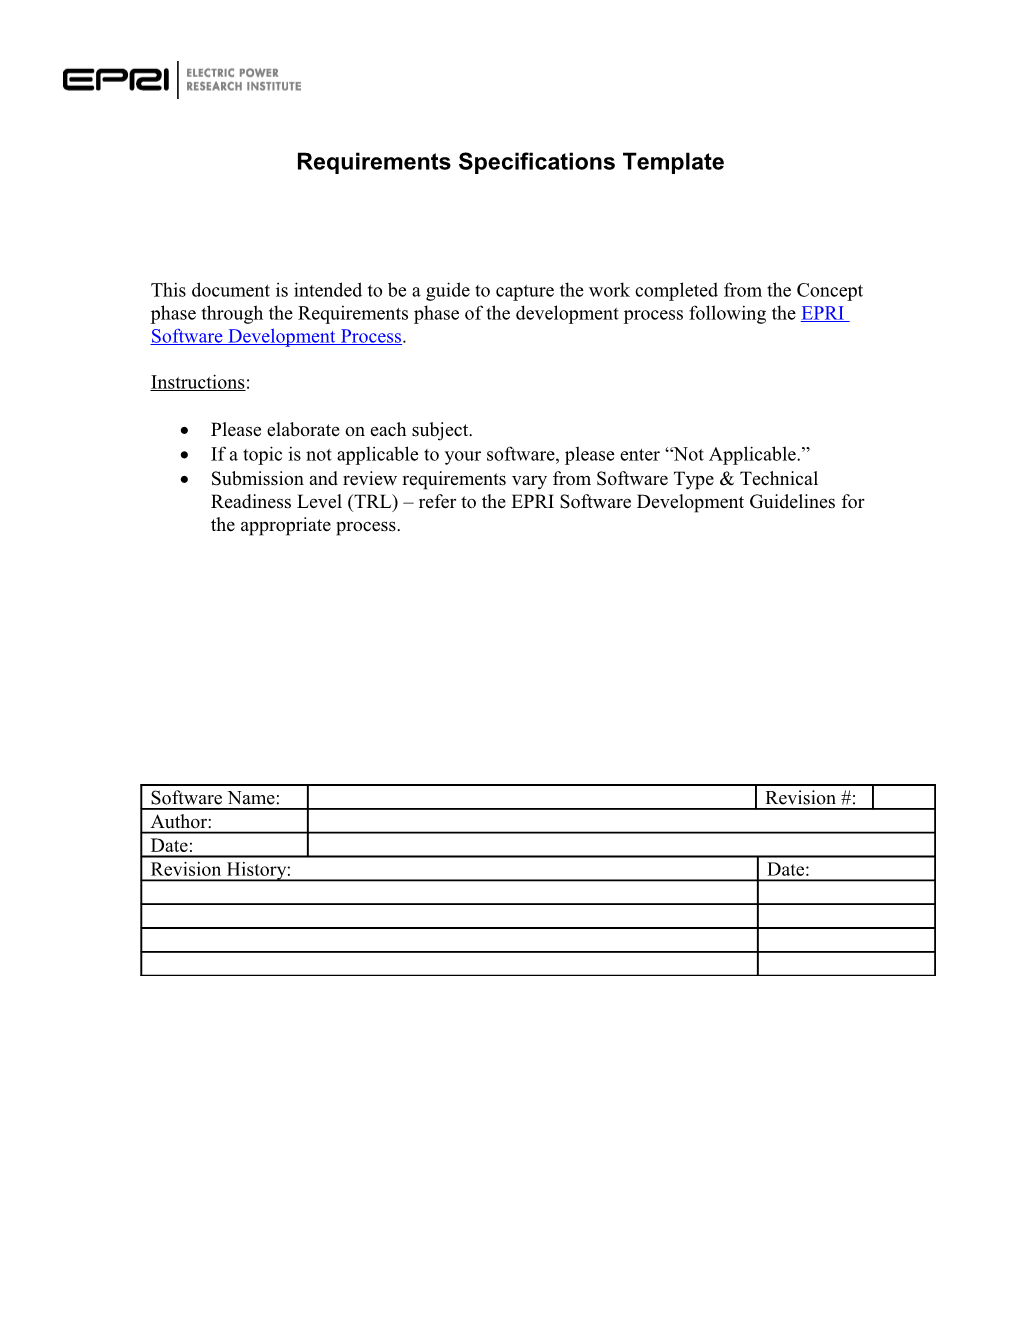 Planning Documents - Software Requirements Document (SRD) Sample